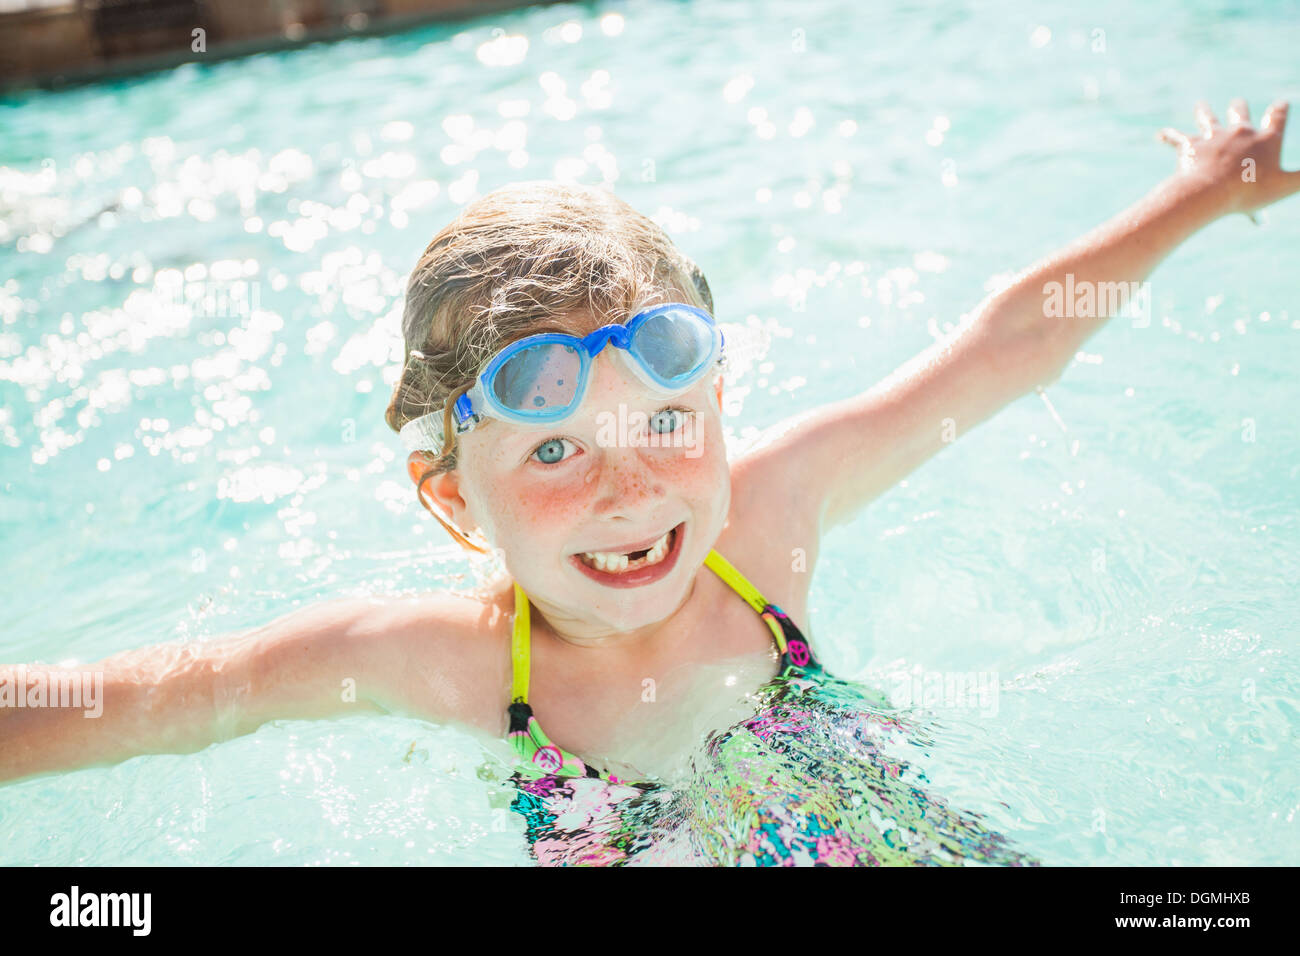 Girl (4-5) playing in swimming pool Banque D'Images